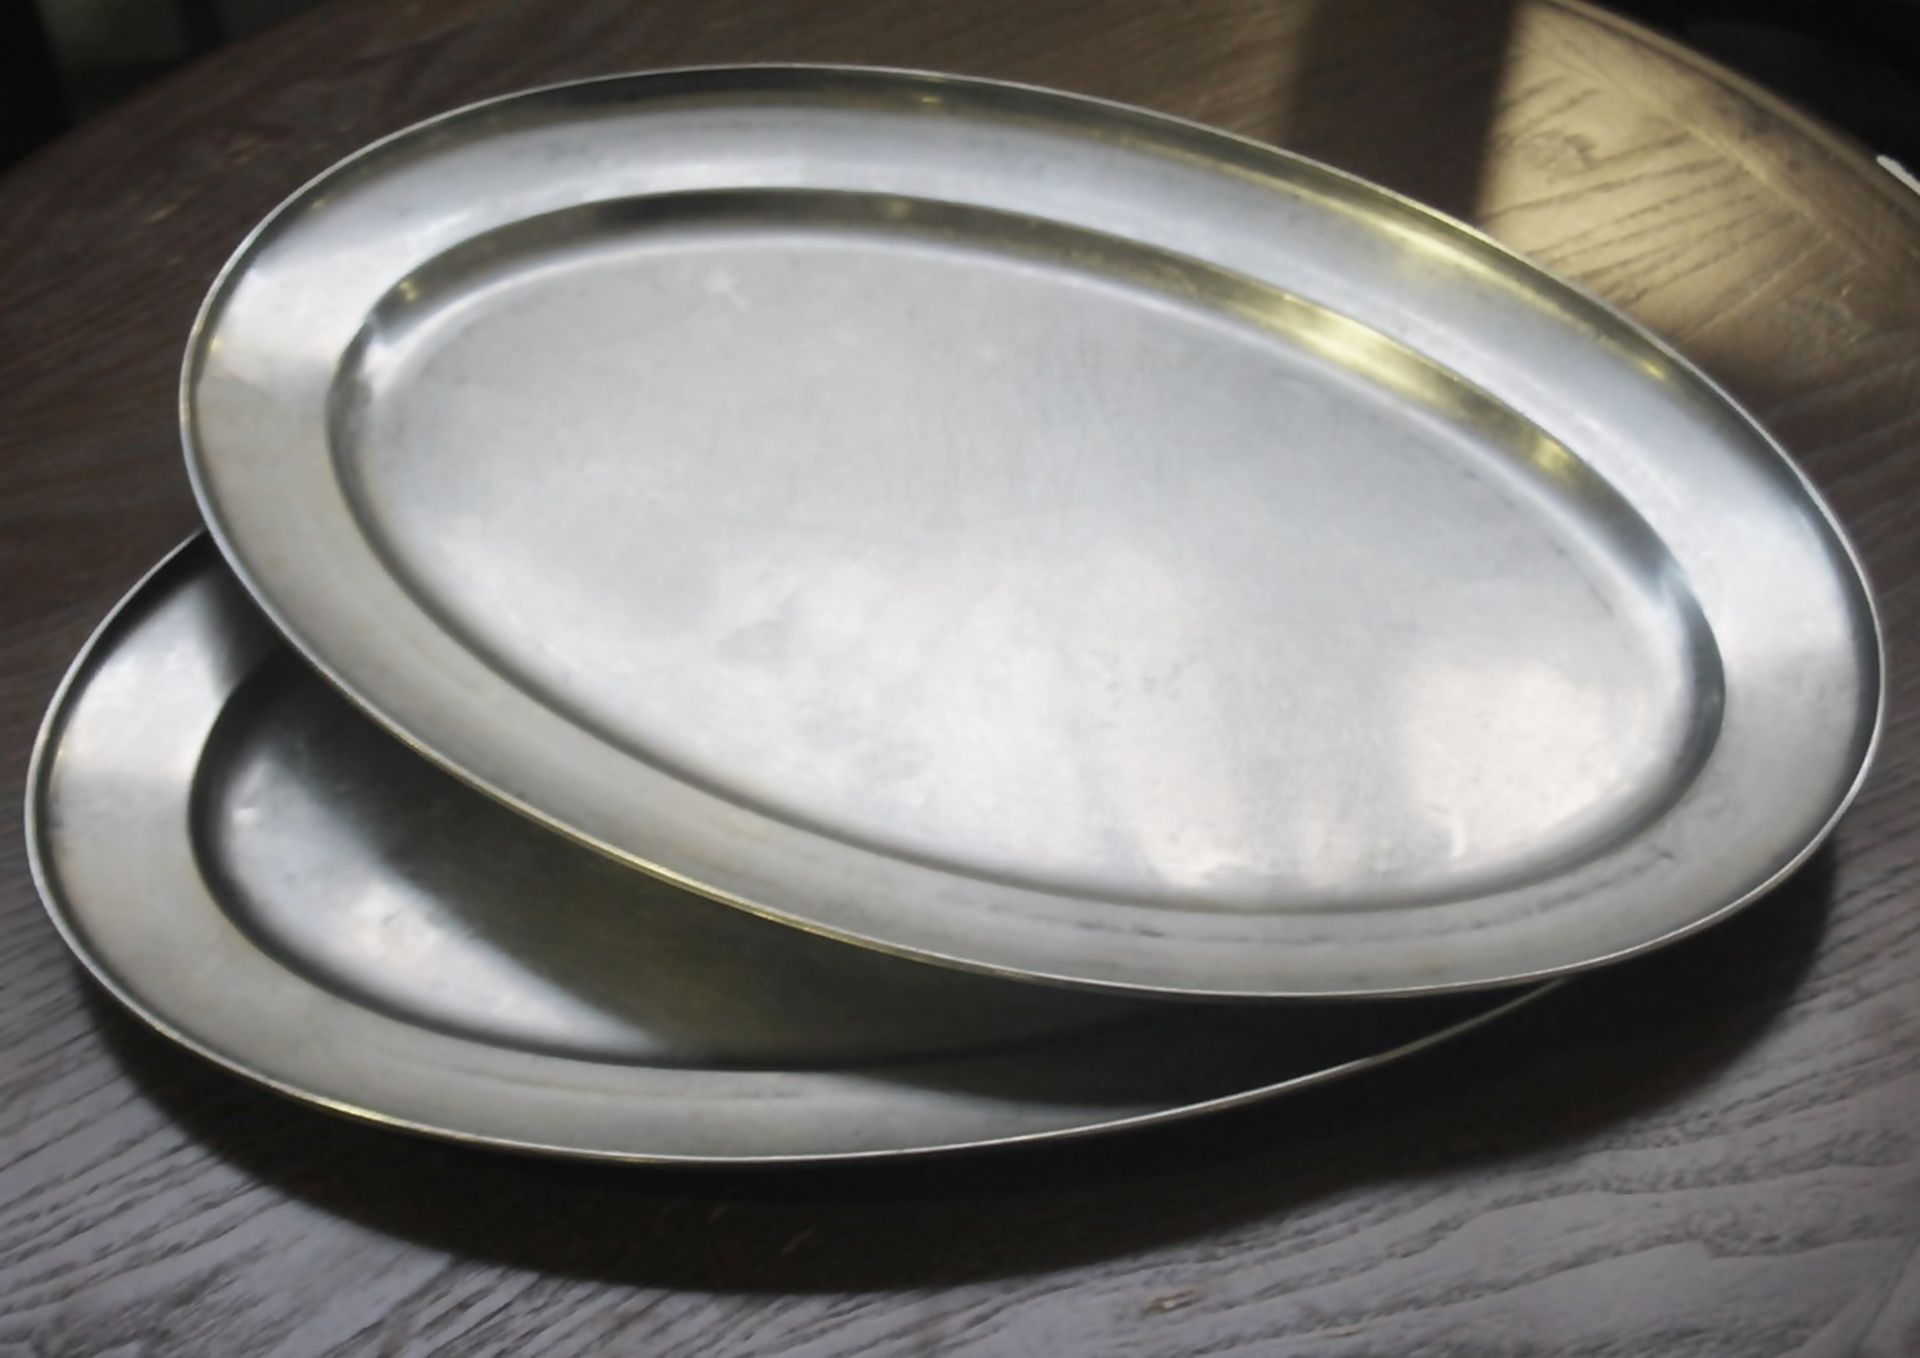 50 x Stainless Steel Oval Restaurant Serving Tray Platters - Dimensions (approx): 45 x 29cm - - Image 4 of 4